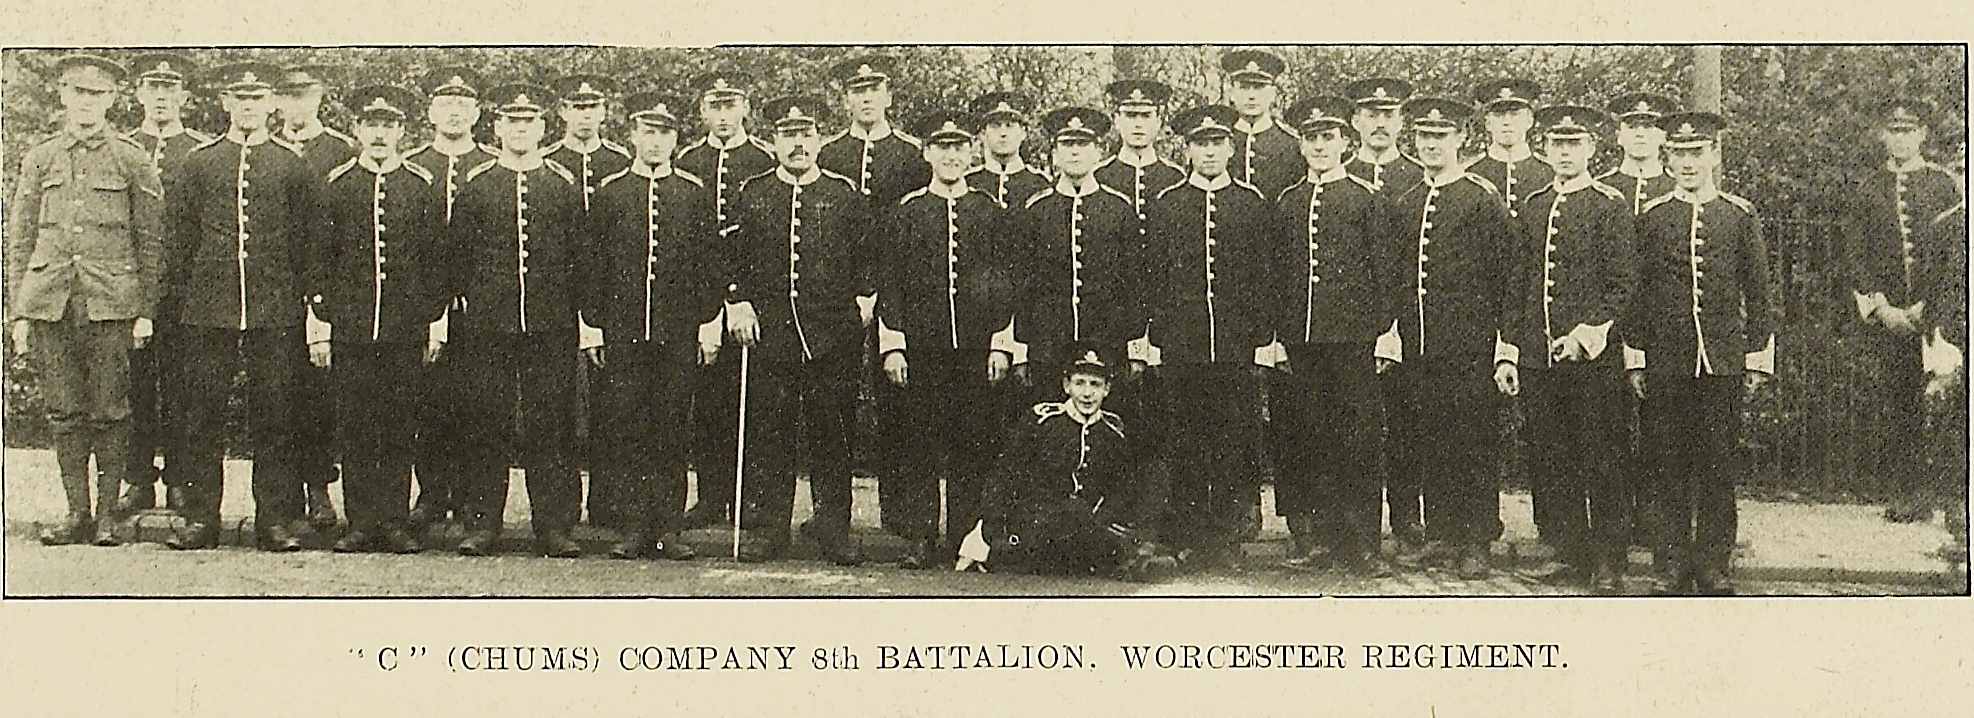 Malvern Chums Company, 8th Worcestershire Regiment in November 1914